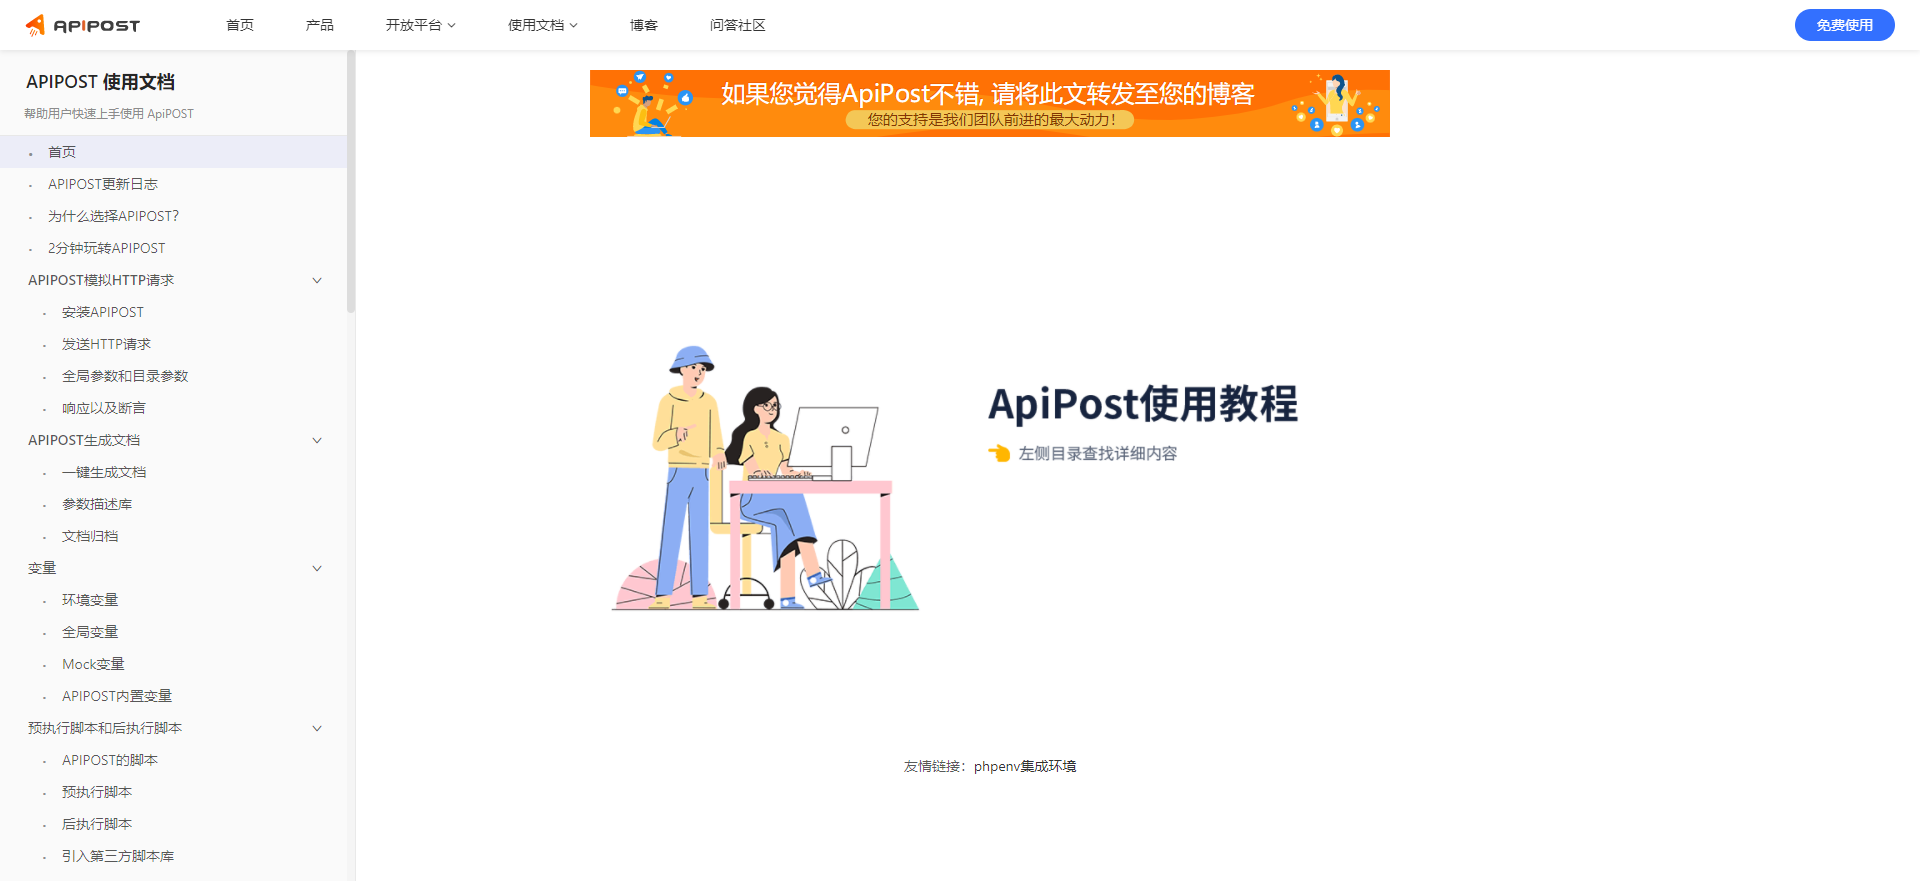 apipost